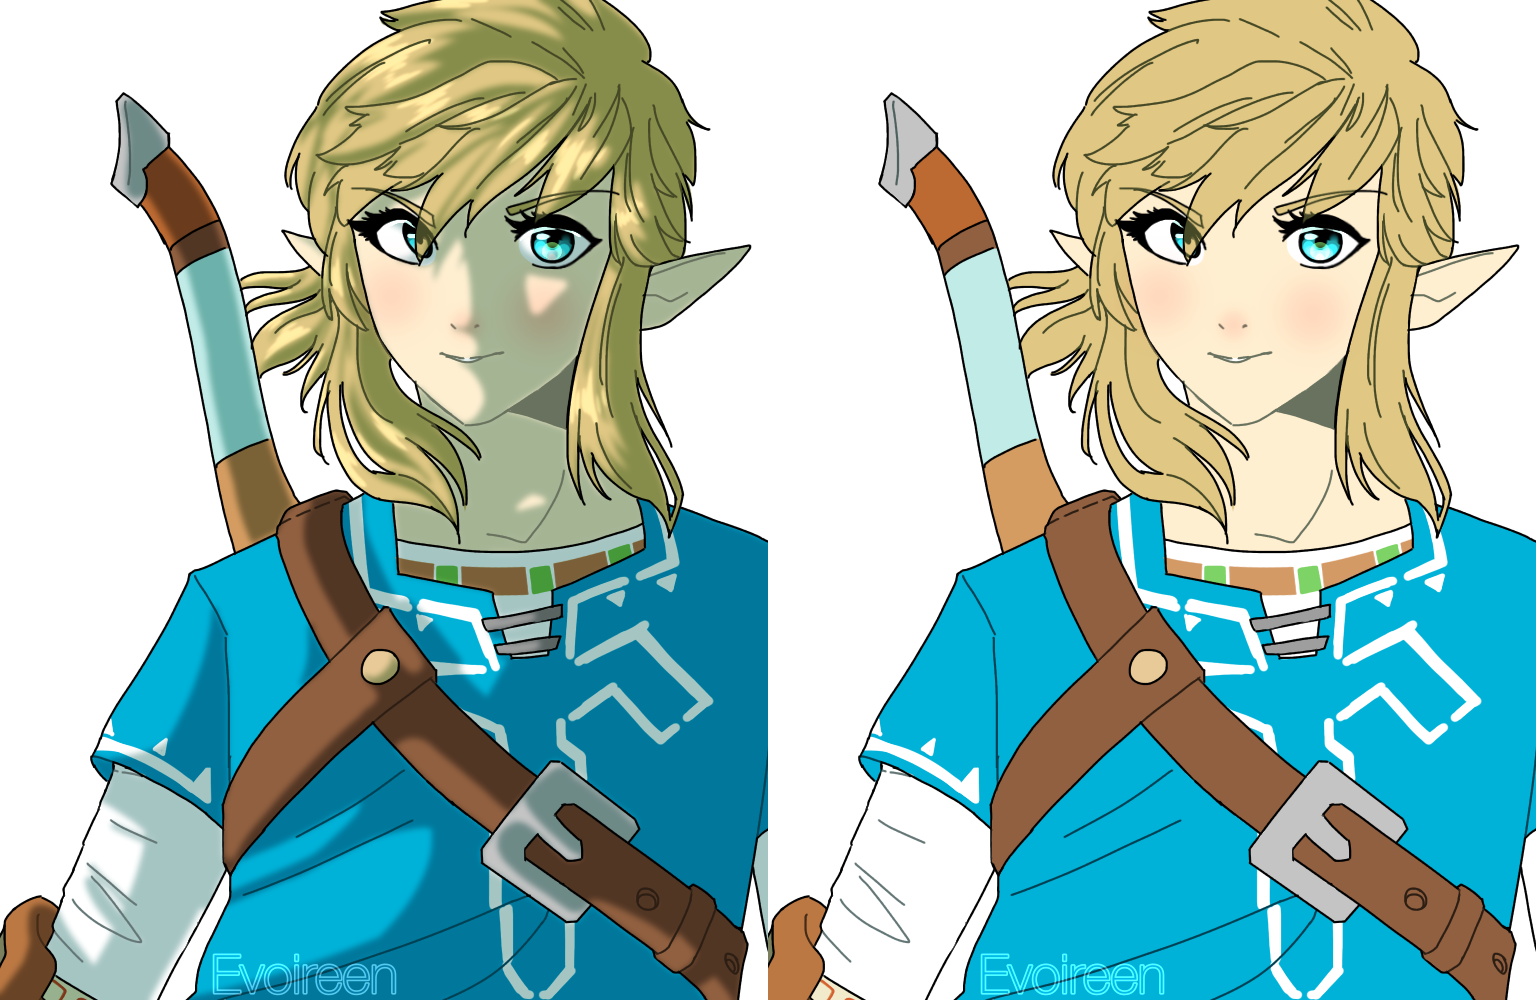 Hello guys,this is my first the legend of zelda fanart, would you like to s...